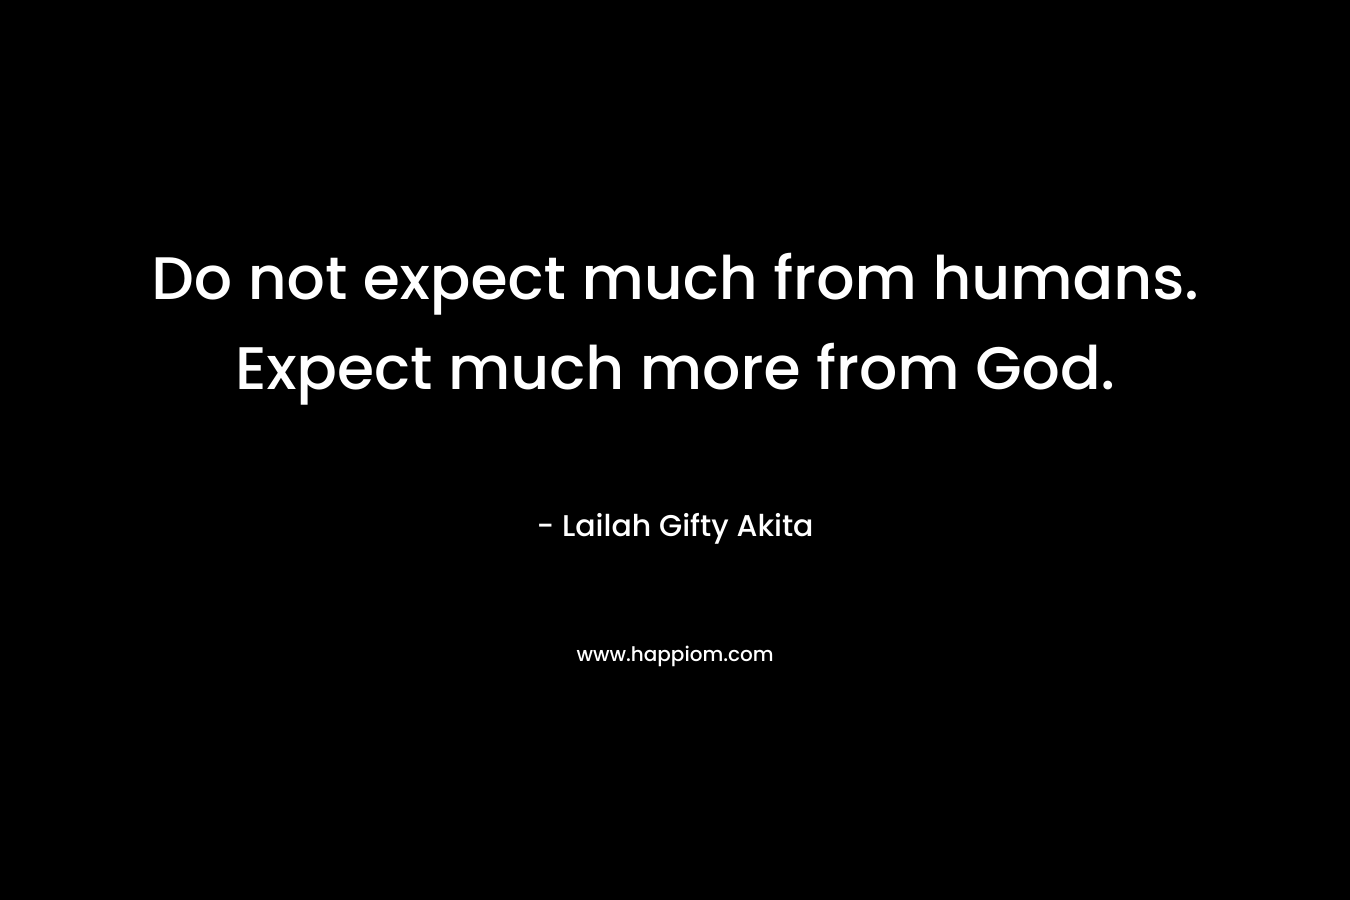 Do not expect much from humans. Expect much more from God.